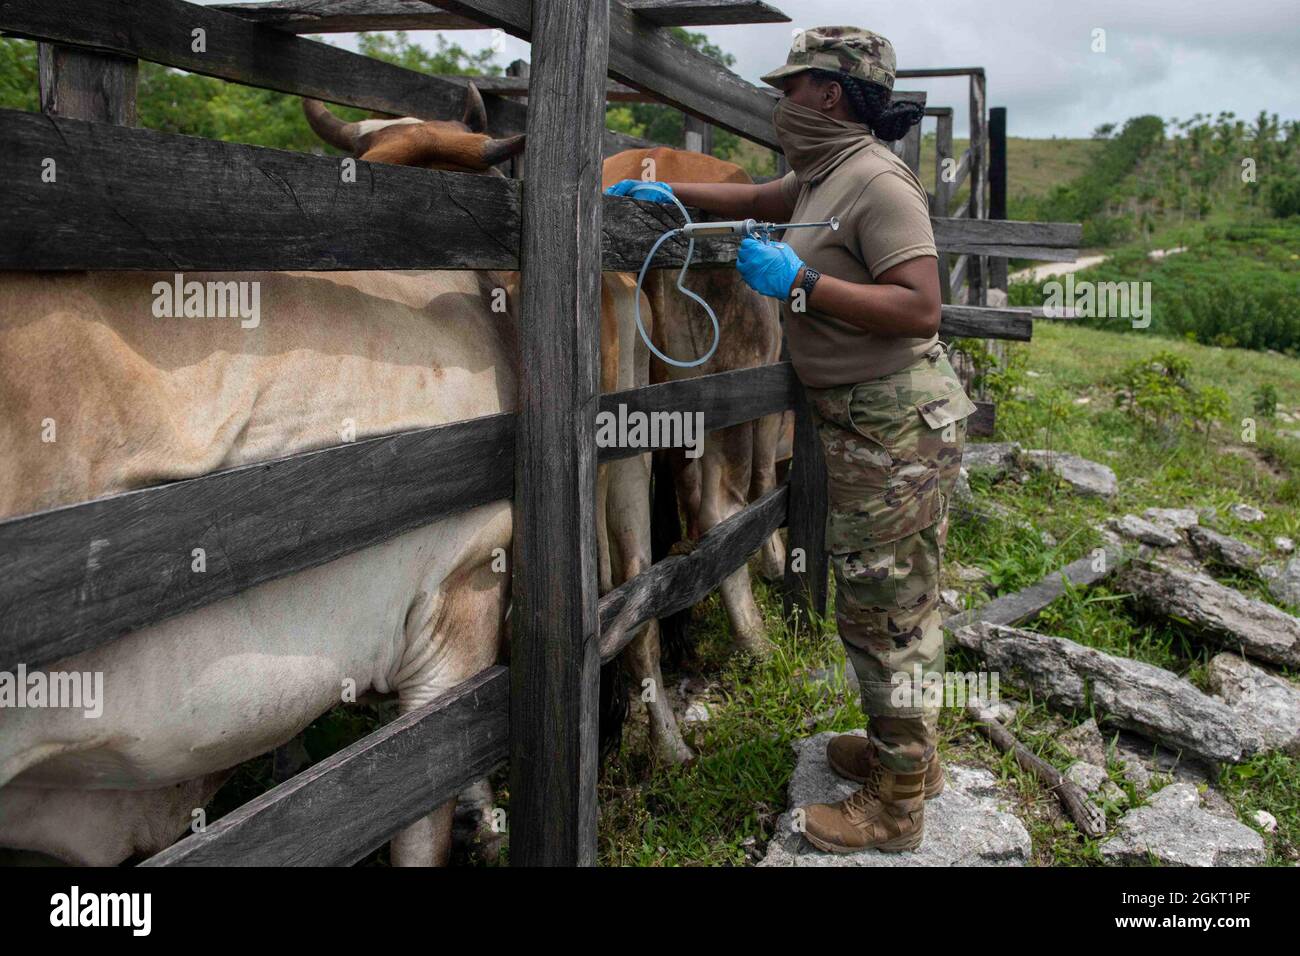 U.S. Army Capt. Shanell Thomas, a veterinarian with the 109th Medical Detachment Veterinary Services out of Garden Grove, California, vaccinates cattle during the Veterinary Readiness Training Exercises portion of Resolute Sentinel 21 in Melchor De Mencos, Guatemala, June 24, 2021. The vet team will provide large animal care education and vaccinations at various locations. Stock Photo